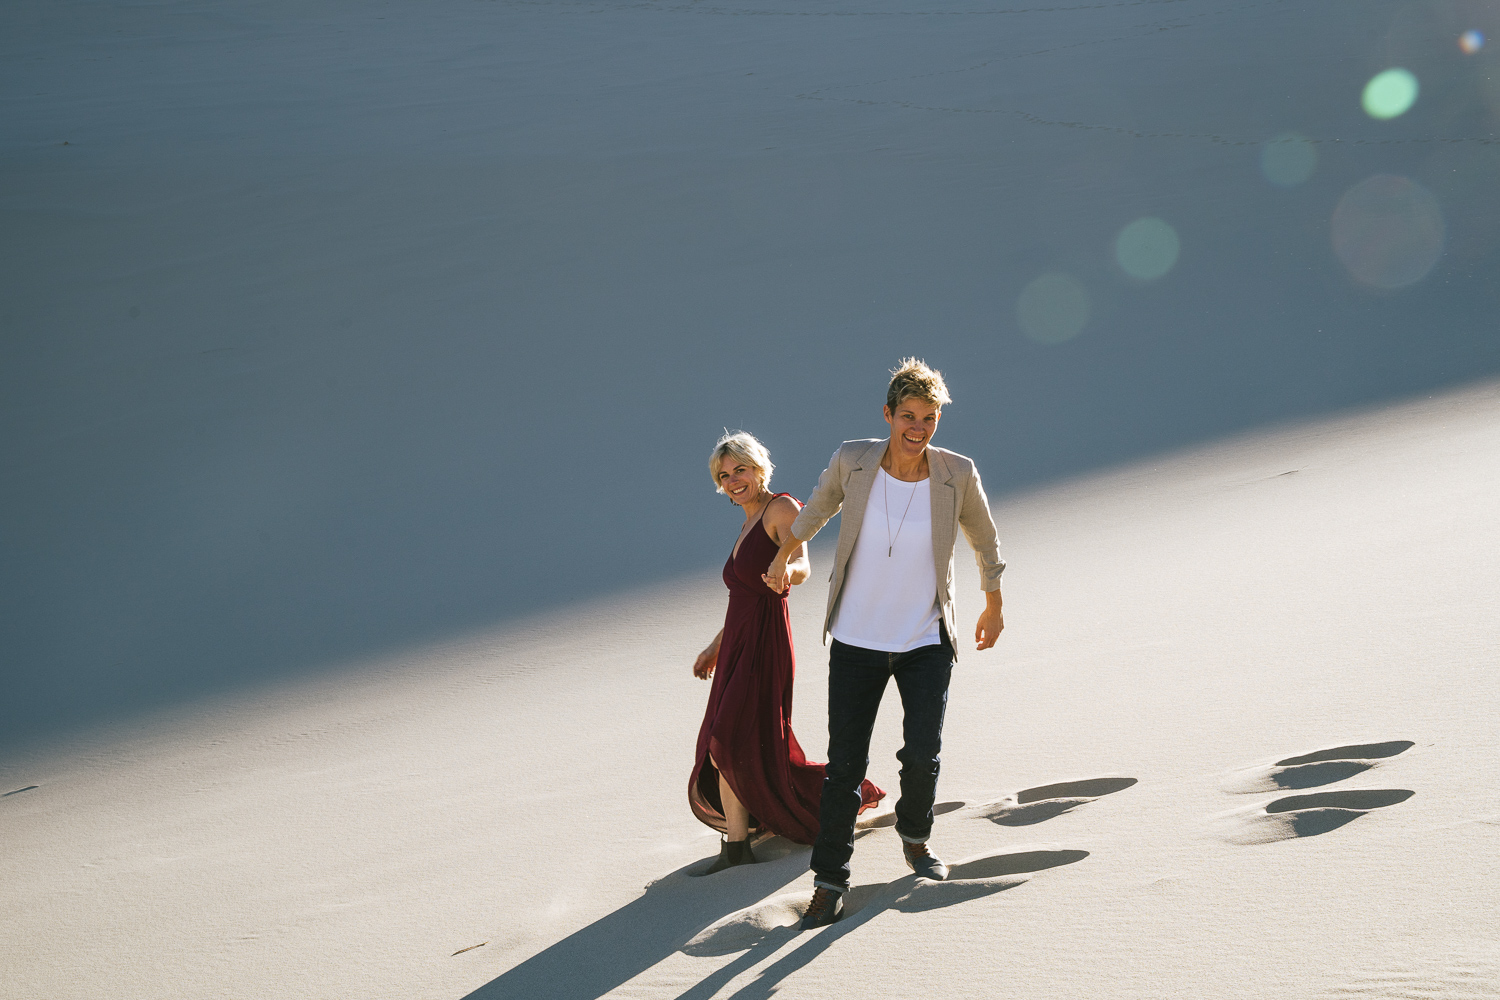 Two brides in the Death Valley Sand dunes, with a bohemian style flowy red dress